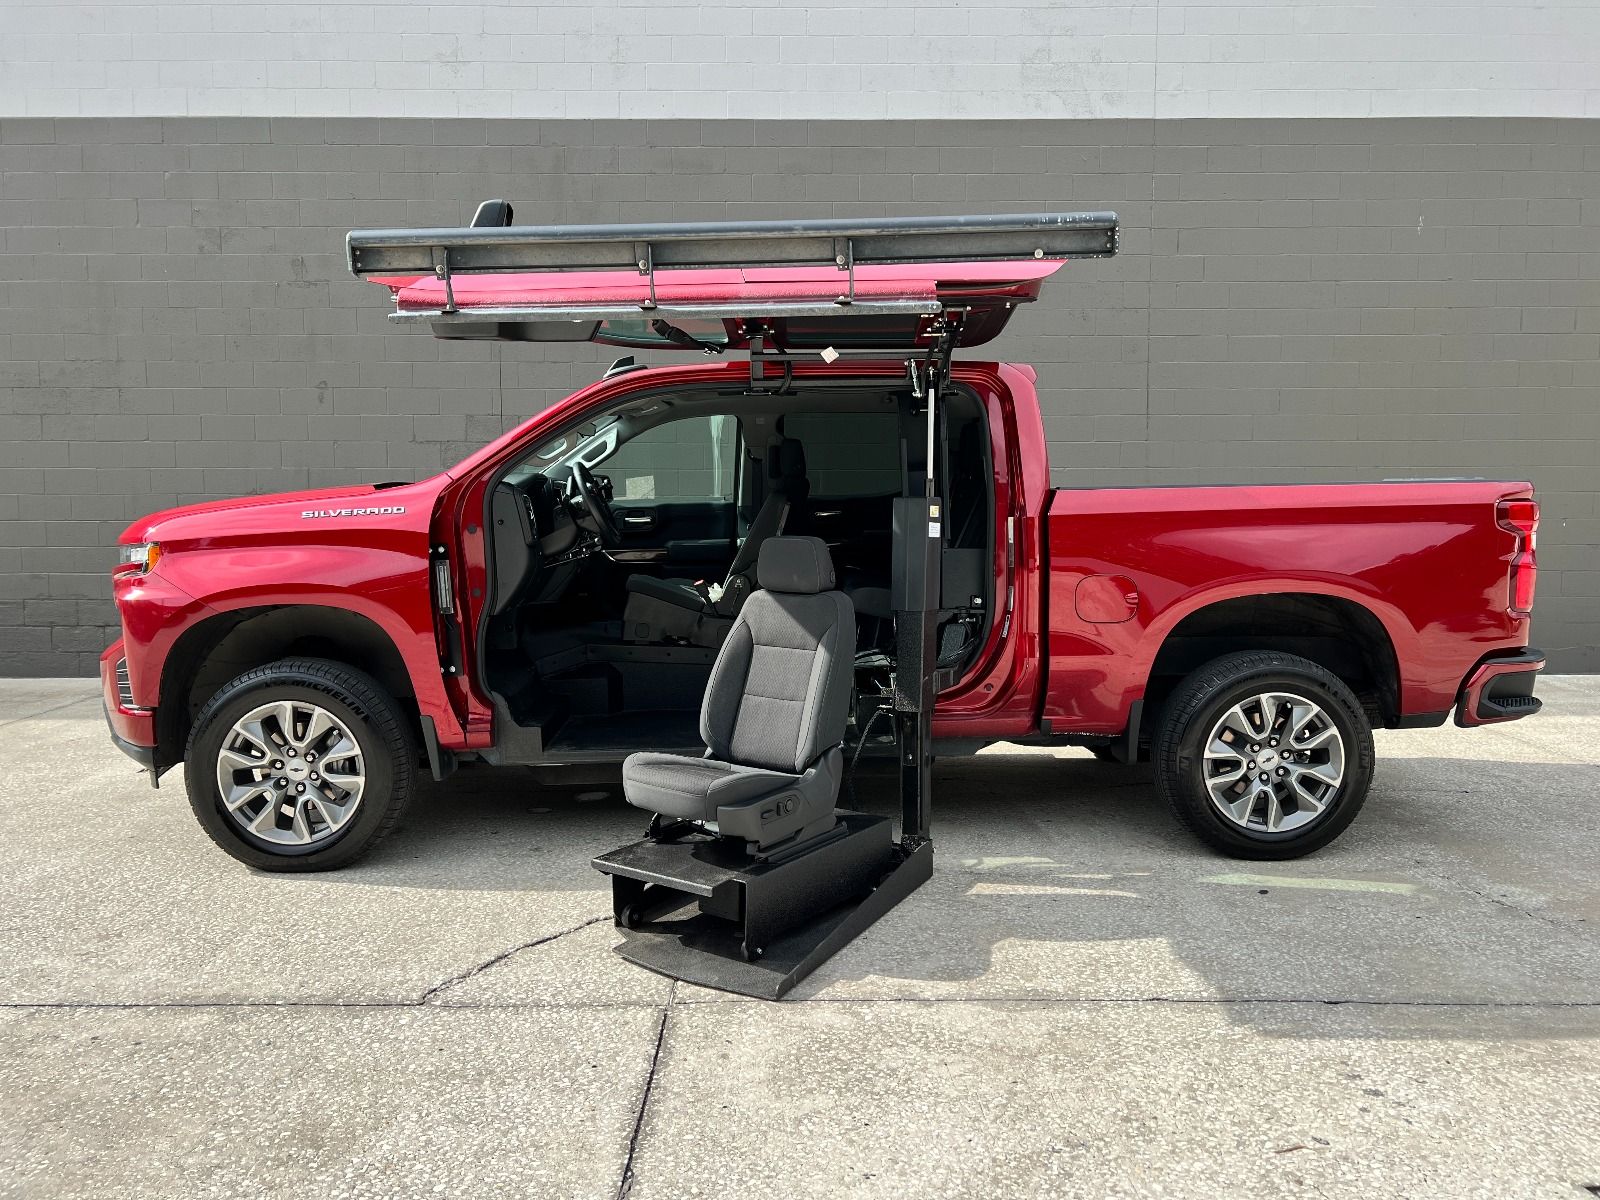 Chevrolet Silverado Wheelchair Accessible Truck with lift deployed from driver side doors.